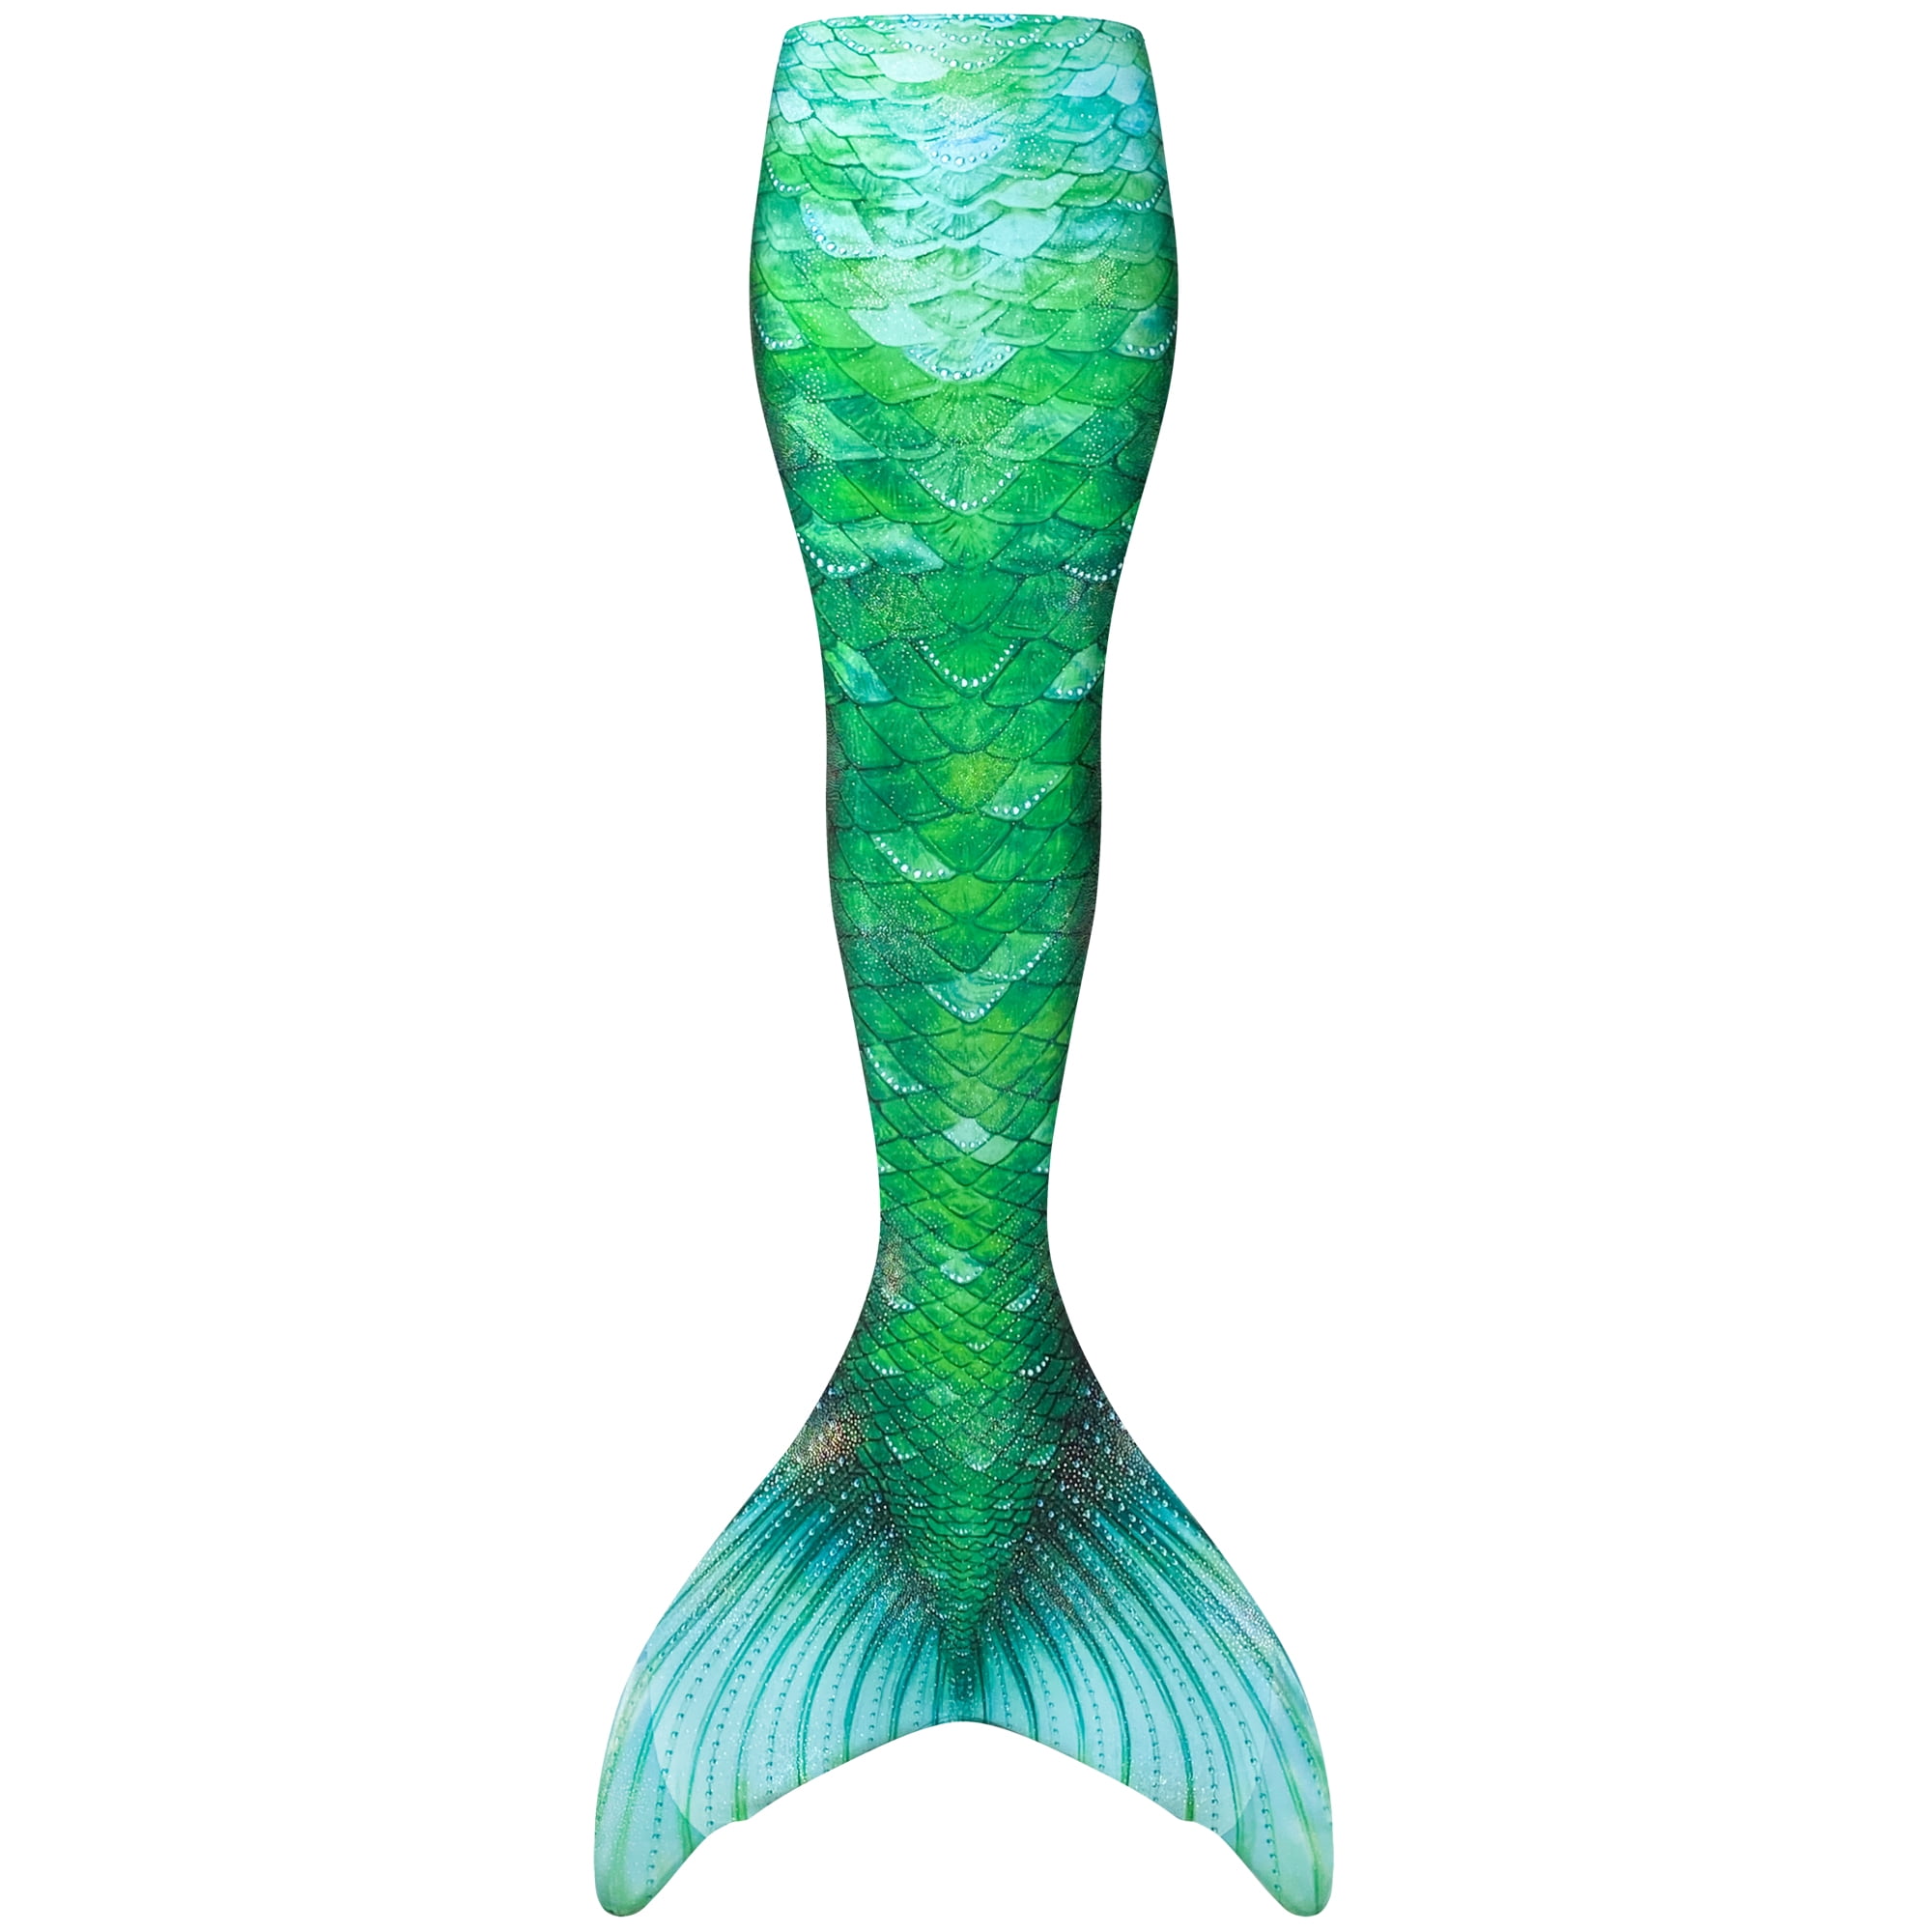 NO Monofin Fin Fun Limited Edition Wear-Resistant Mermaid Tail for Swimming Kids and Adults 